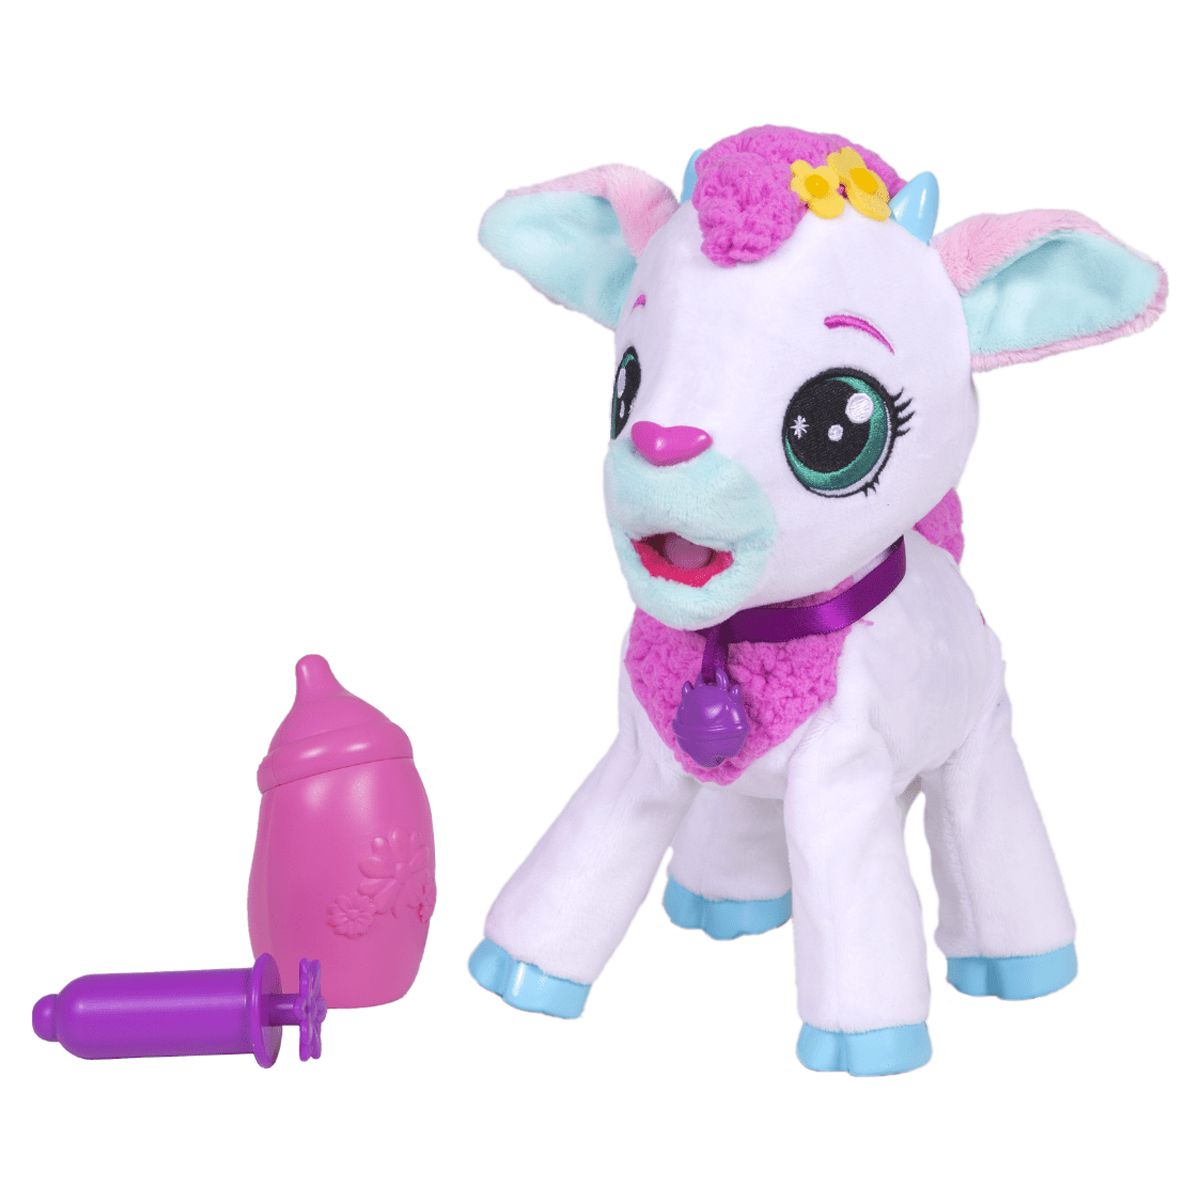 Club Petz Baby Goat - Makes +30 Realistic Sounds and Includes 4 Accessories! - image 1 of 14